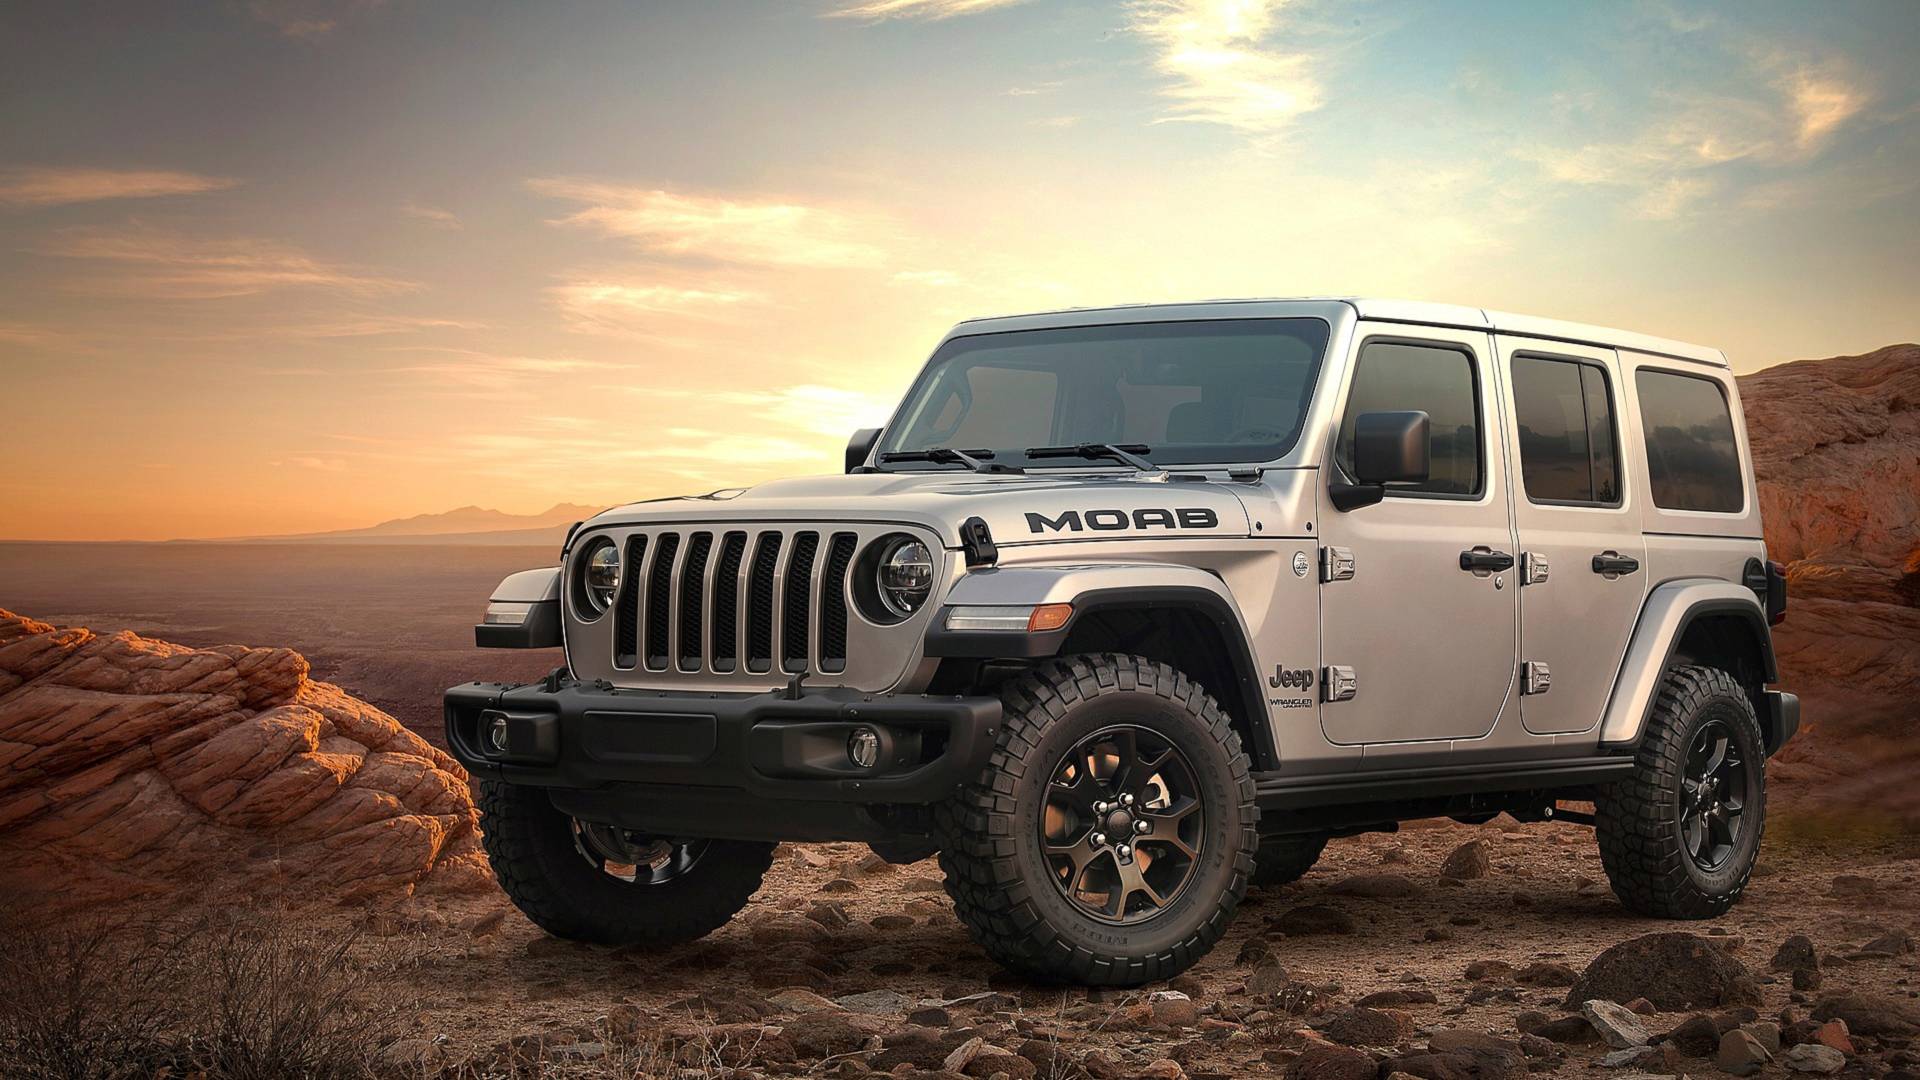 Jeep Wrangler Plug-In Coming in 2020 from Toledo Assembly - autoevolution